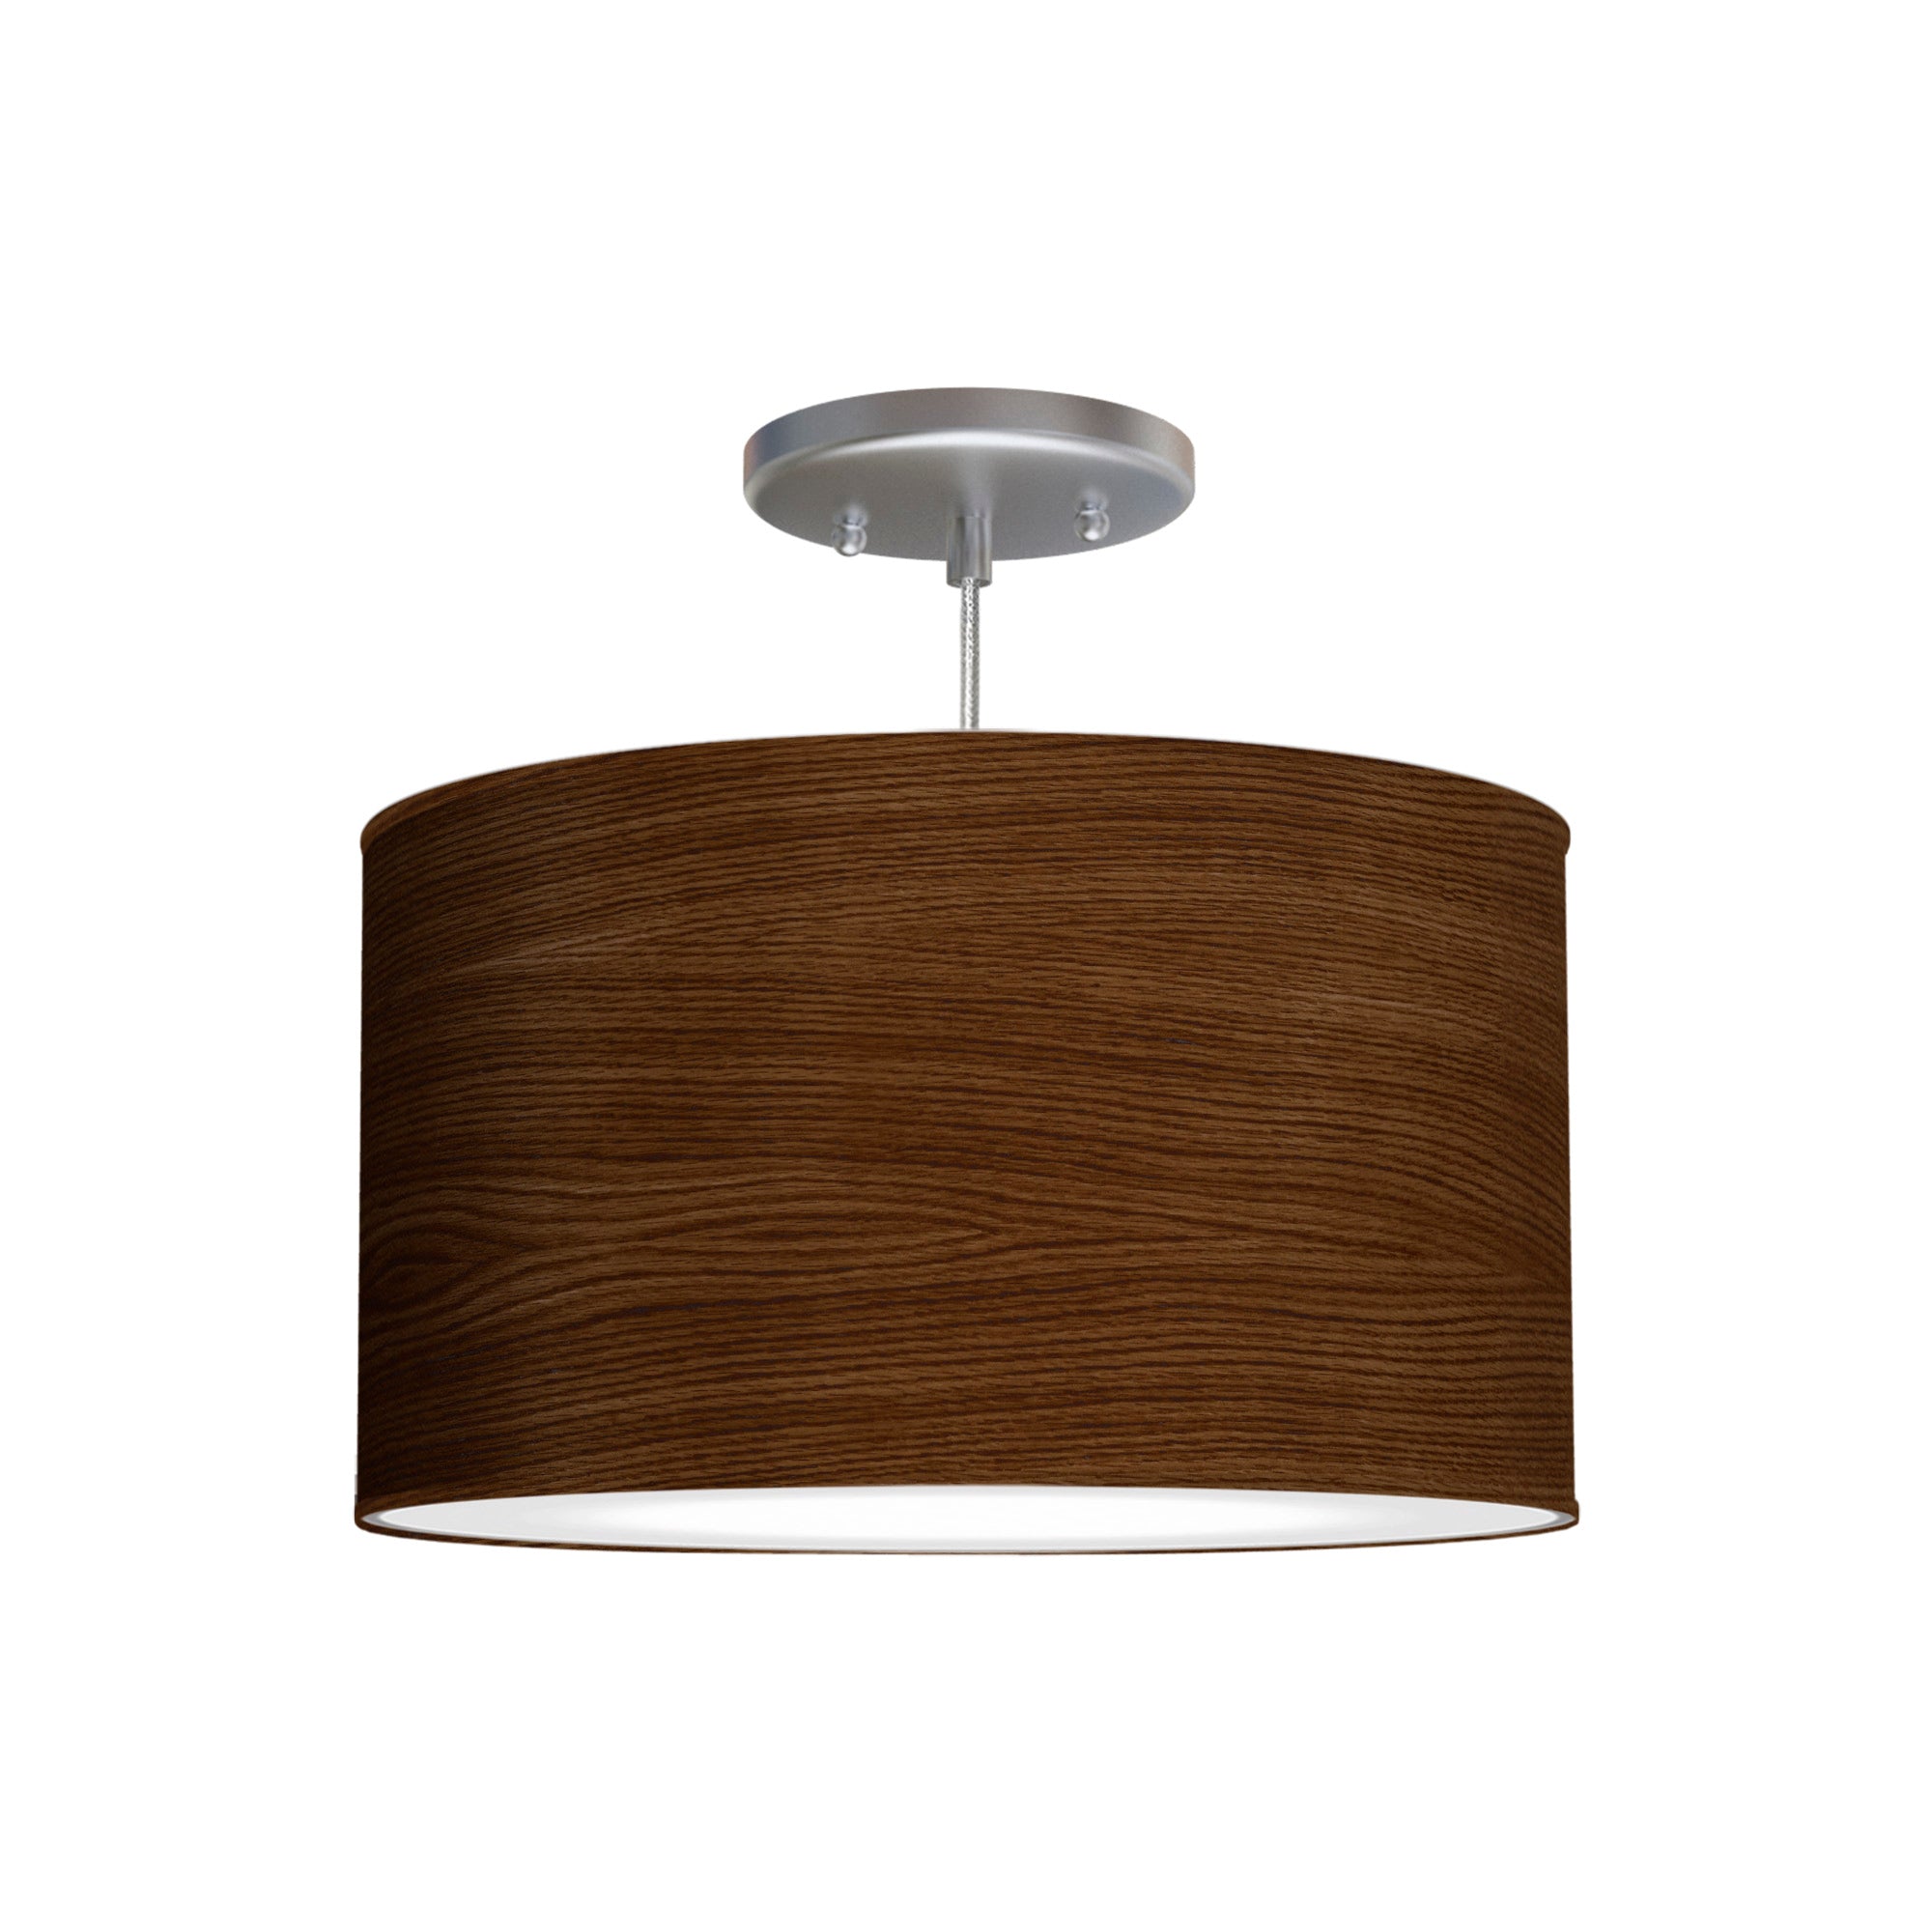 The Gab Hanging Lamp from Seascape Fixtures with a photo veneer shade in chocolate color.